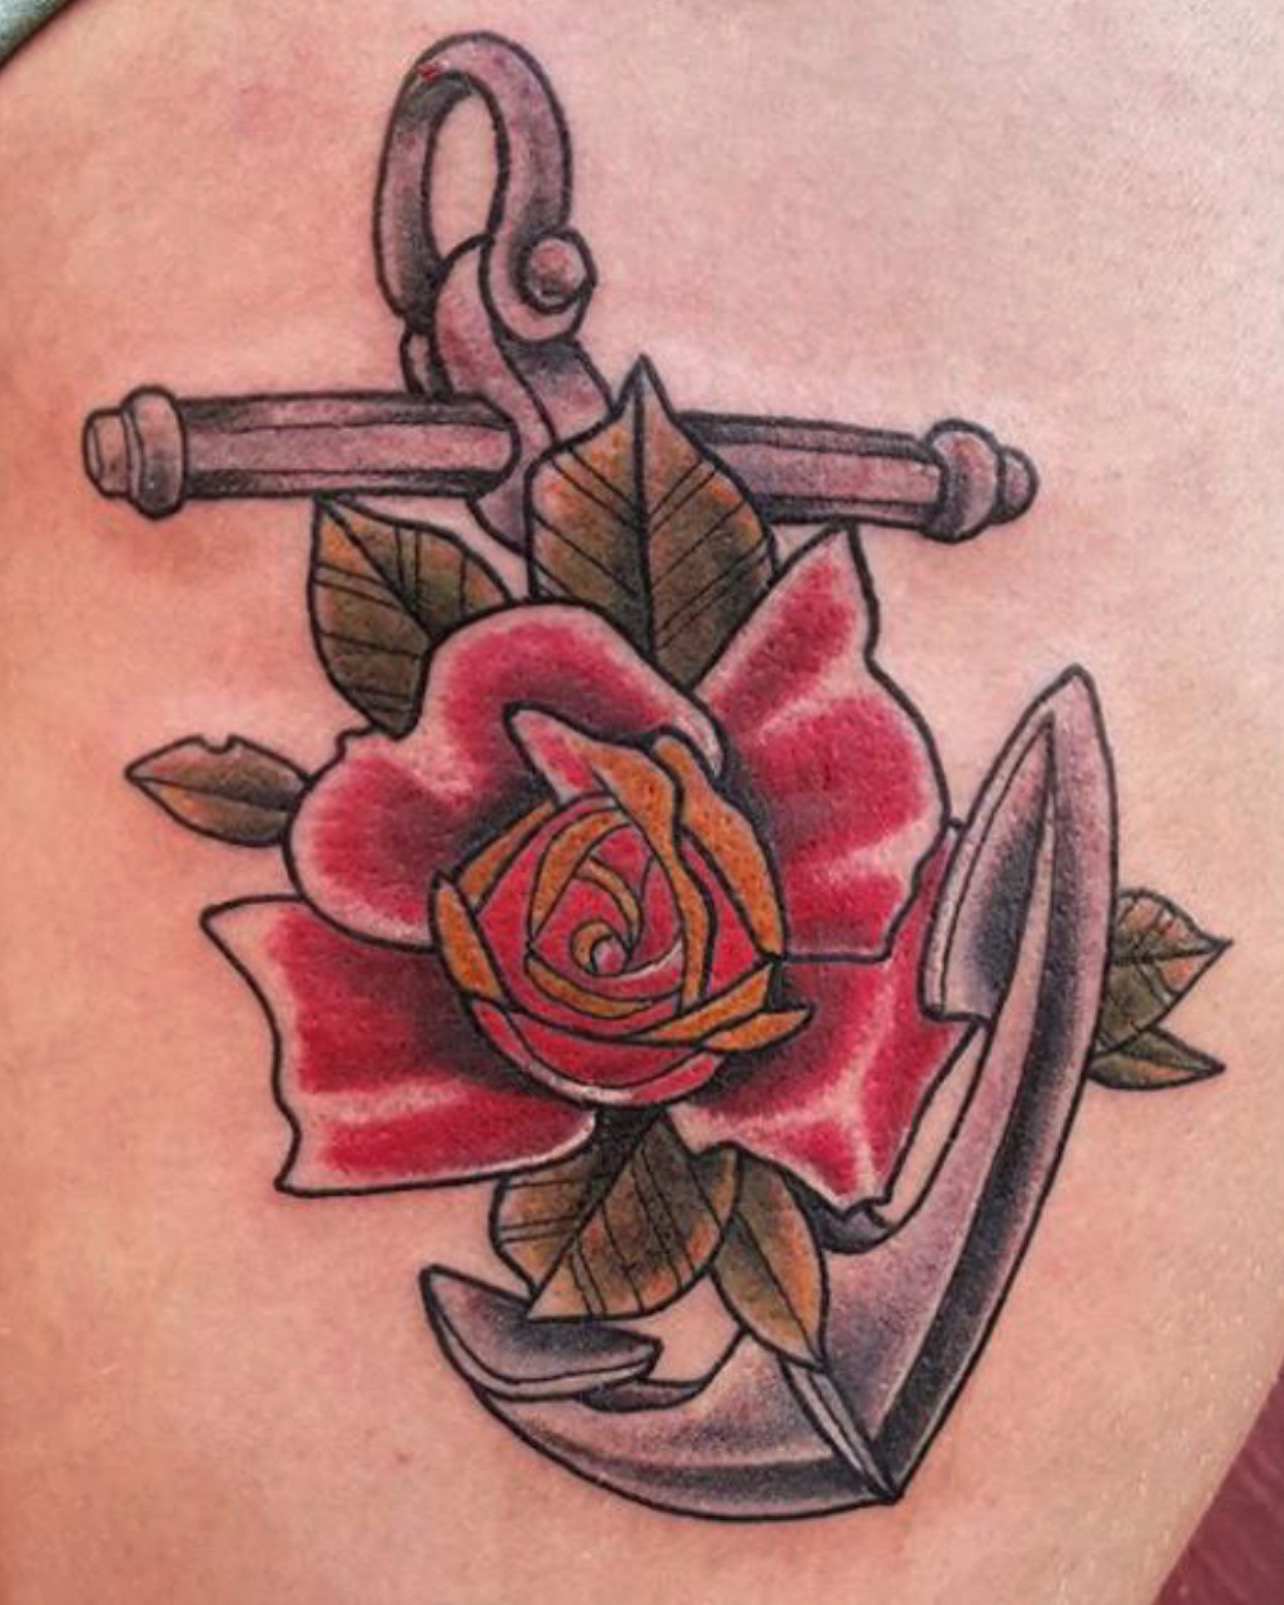 Knitted tattoo of a rose with music elements and the name ashley on Craiyon